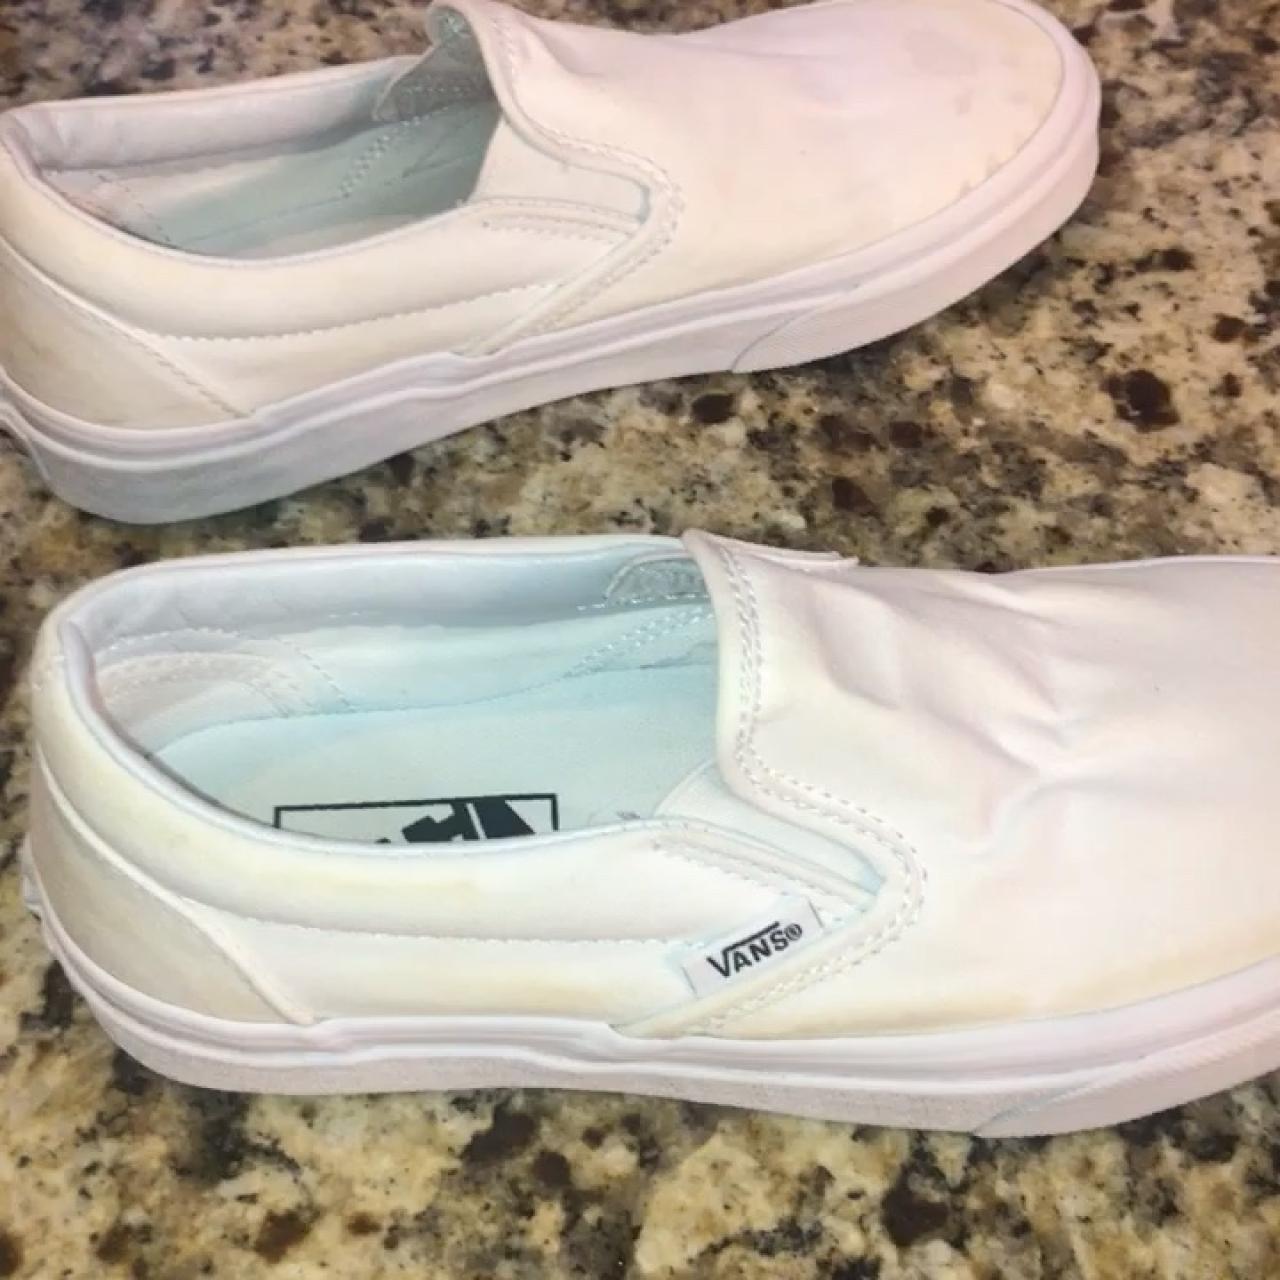 how to clean white slip on vans that turned yellow